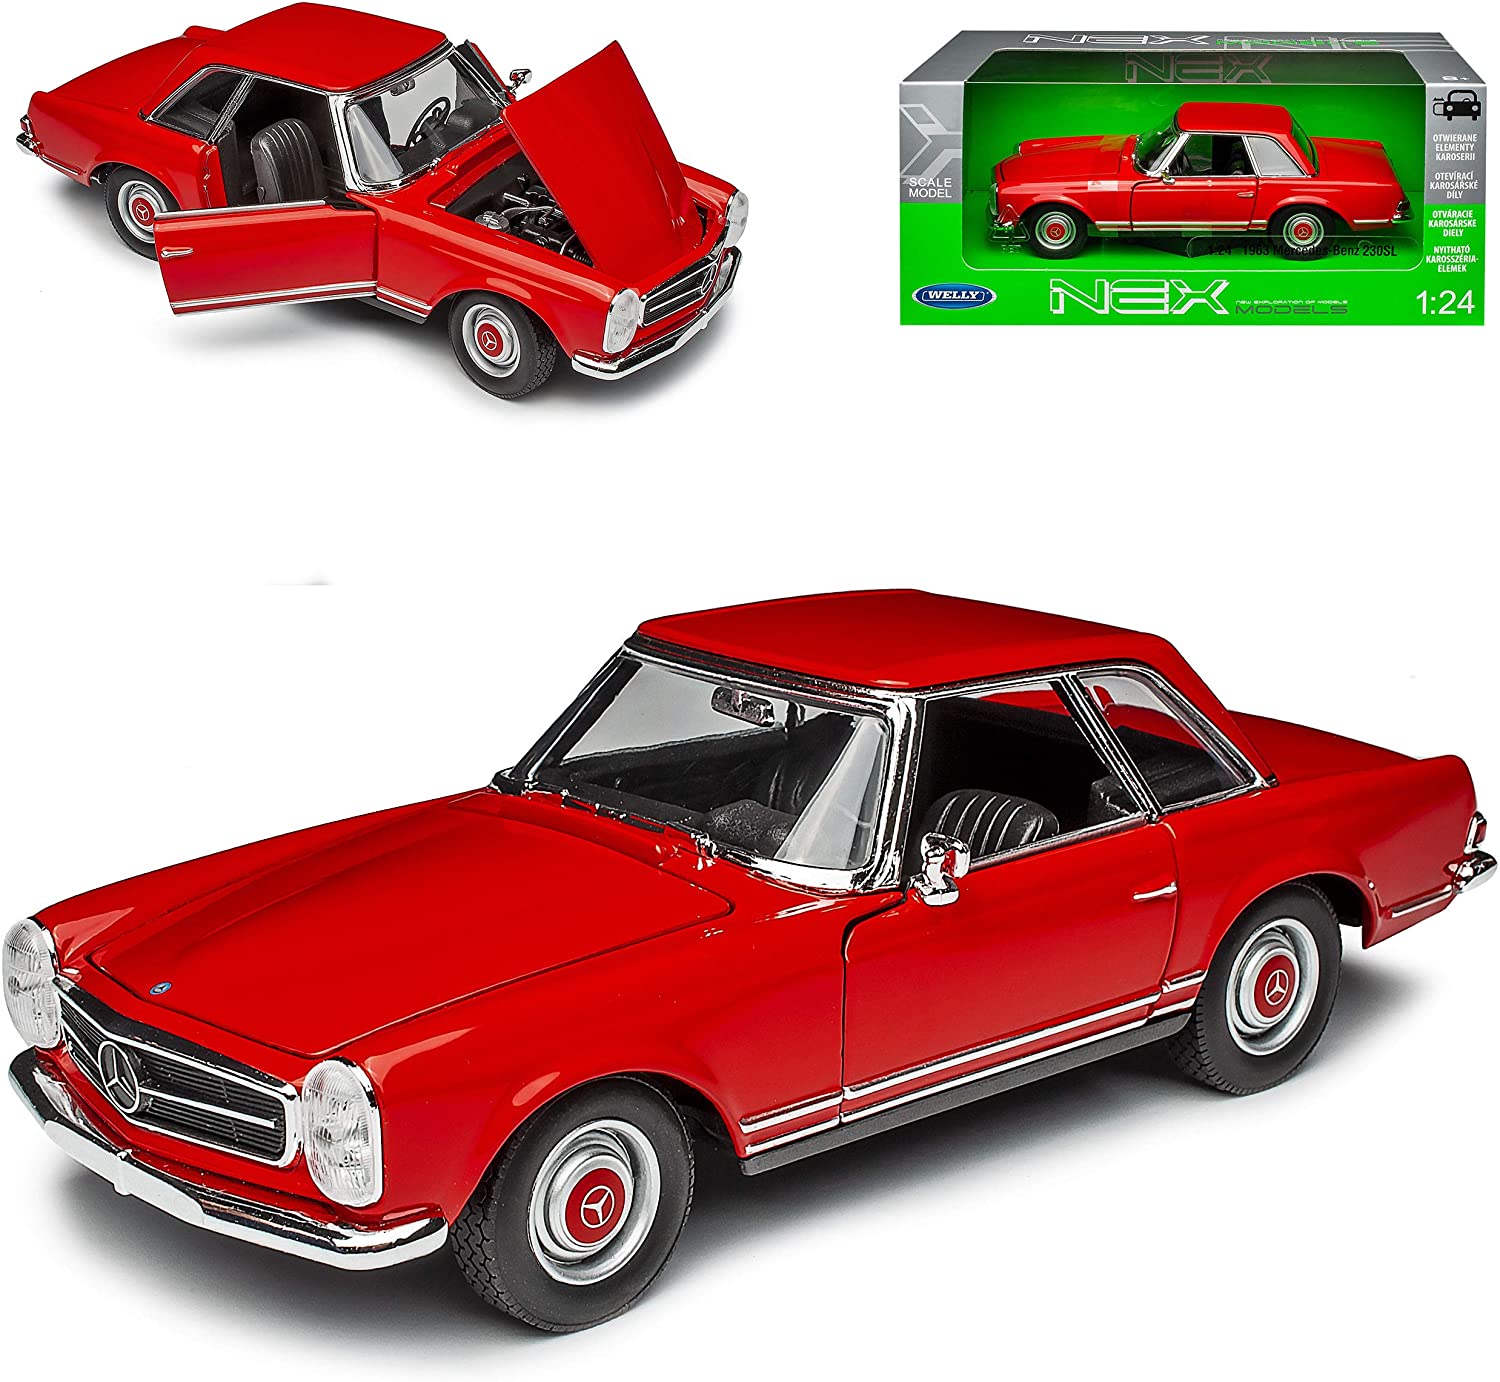 Mercedes-Benz 230Sl Pagoda Coupe Red W113 1963-1971 1/24 Welly Model Car